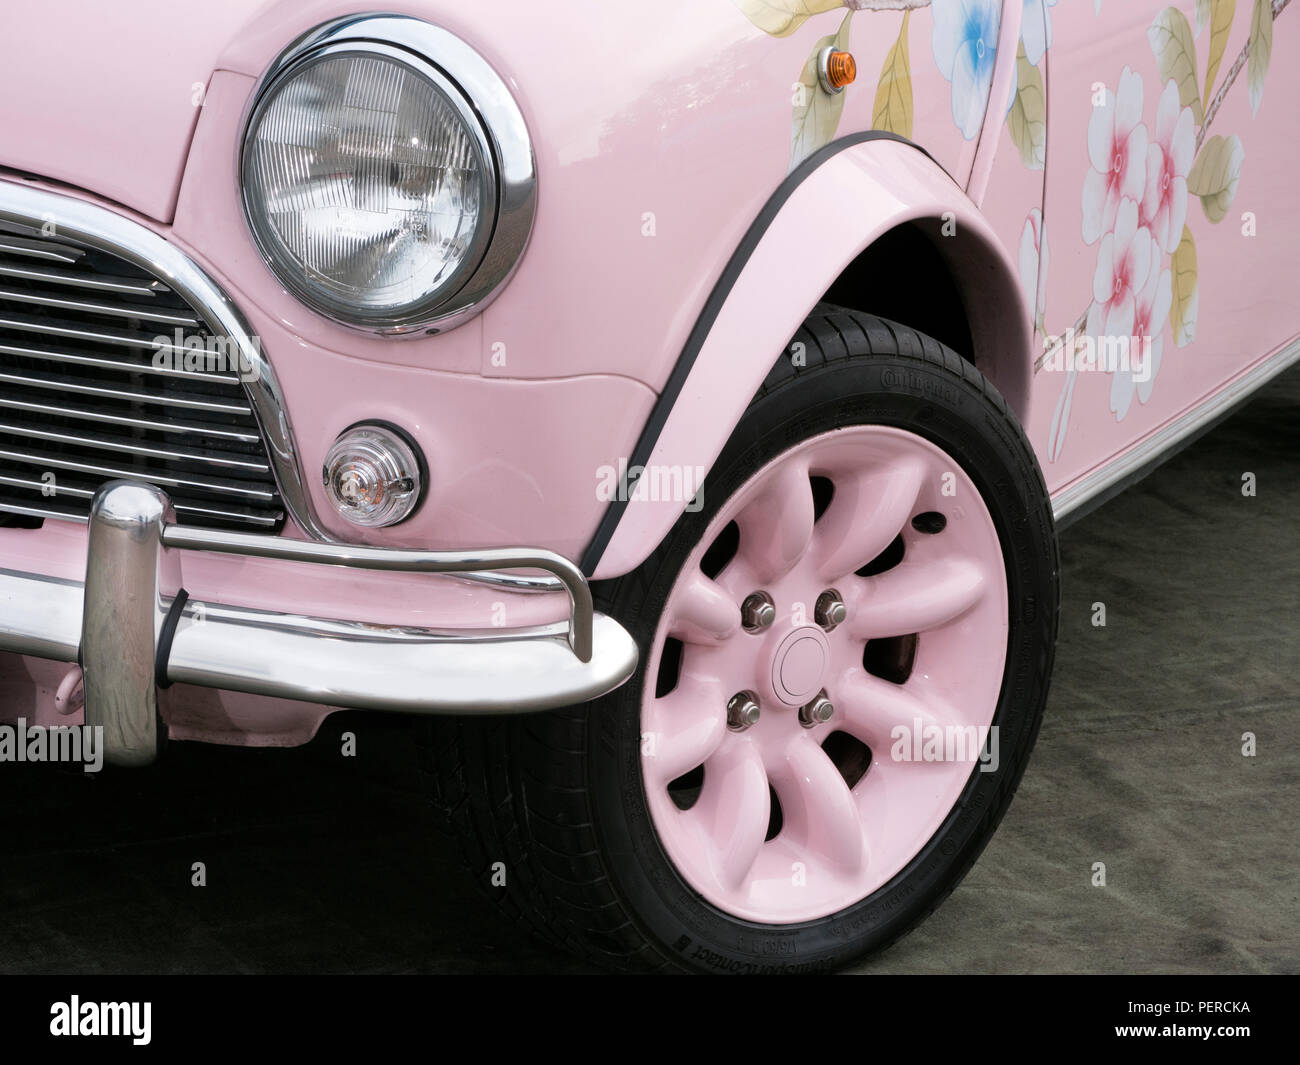 2000 Rover Mini flower painted. Stock Photo